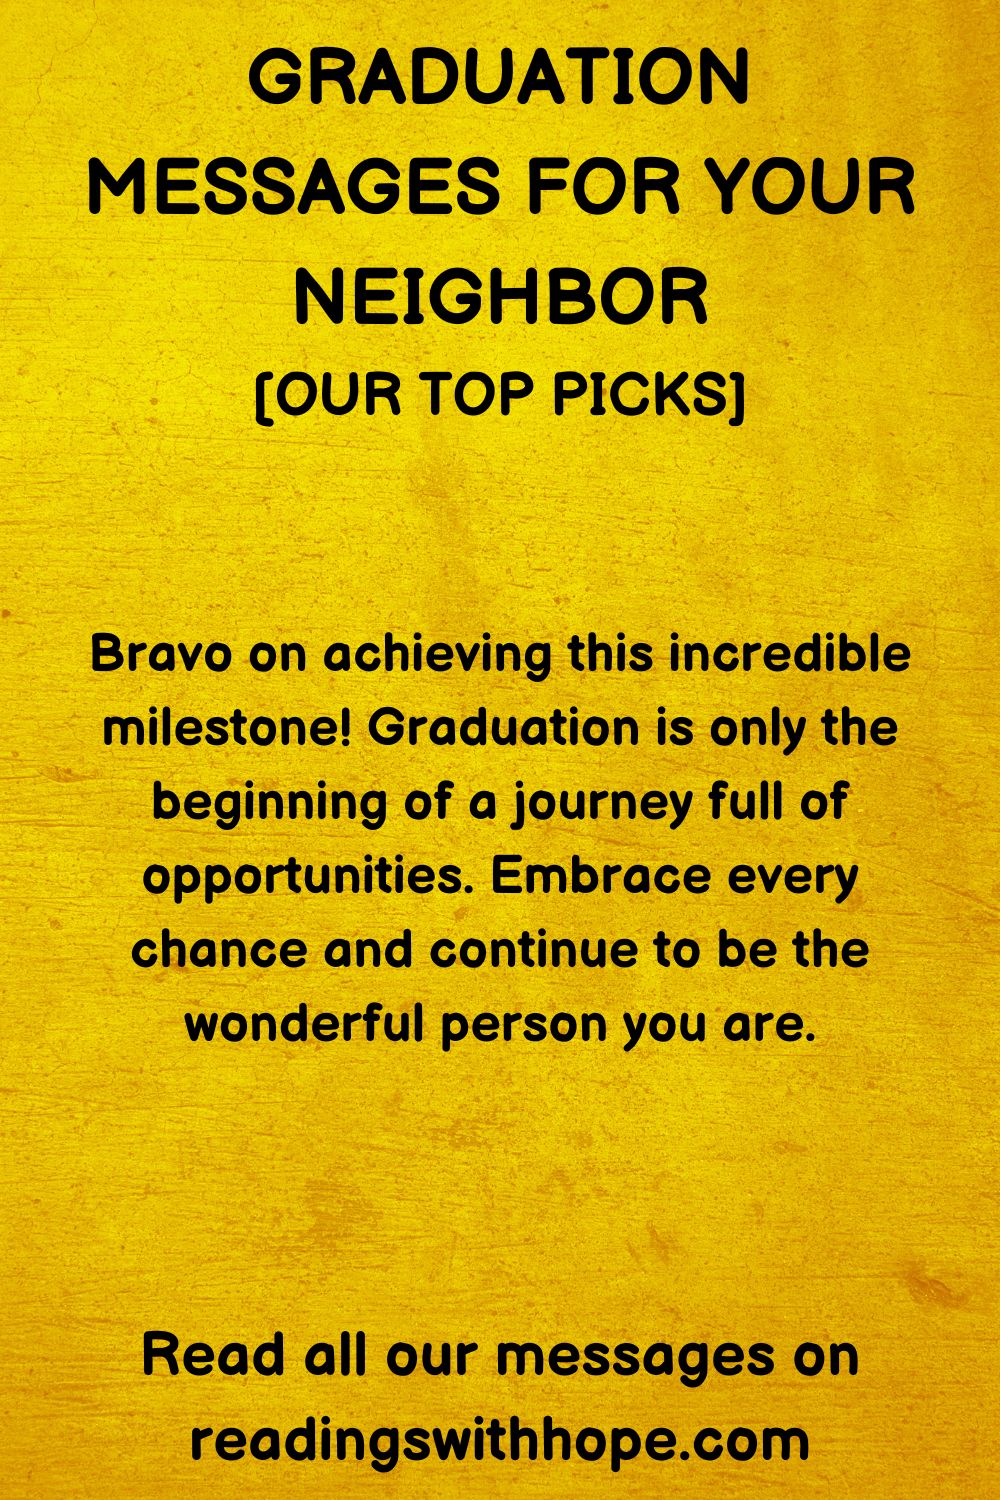 48 Graduation Messages For Your Neighbor